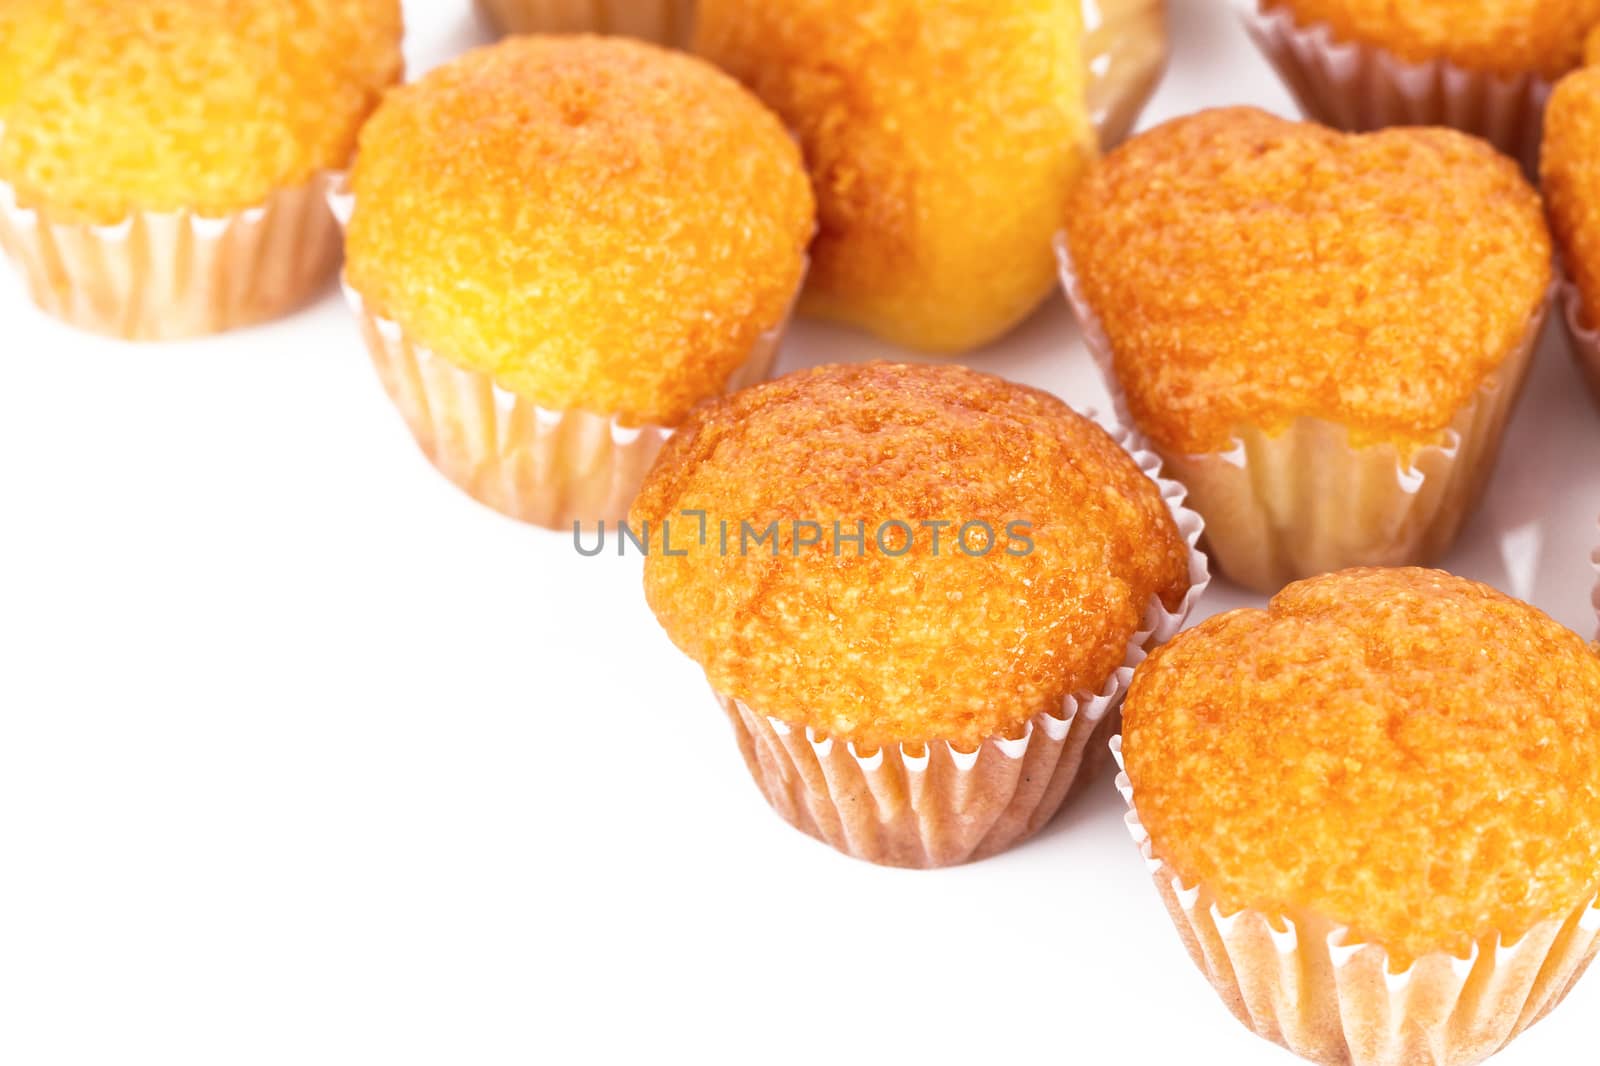 Delicious mini muffins on a white background by supersaiyan